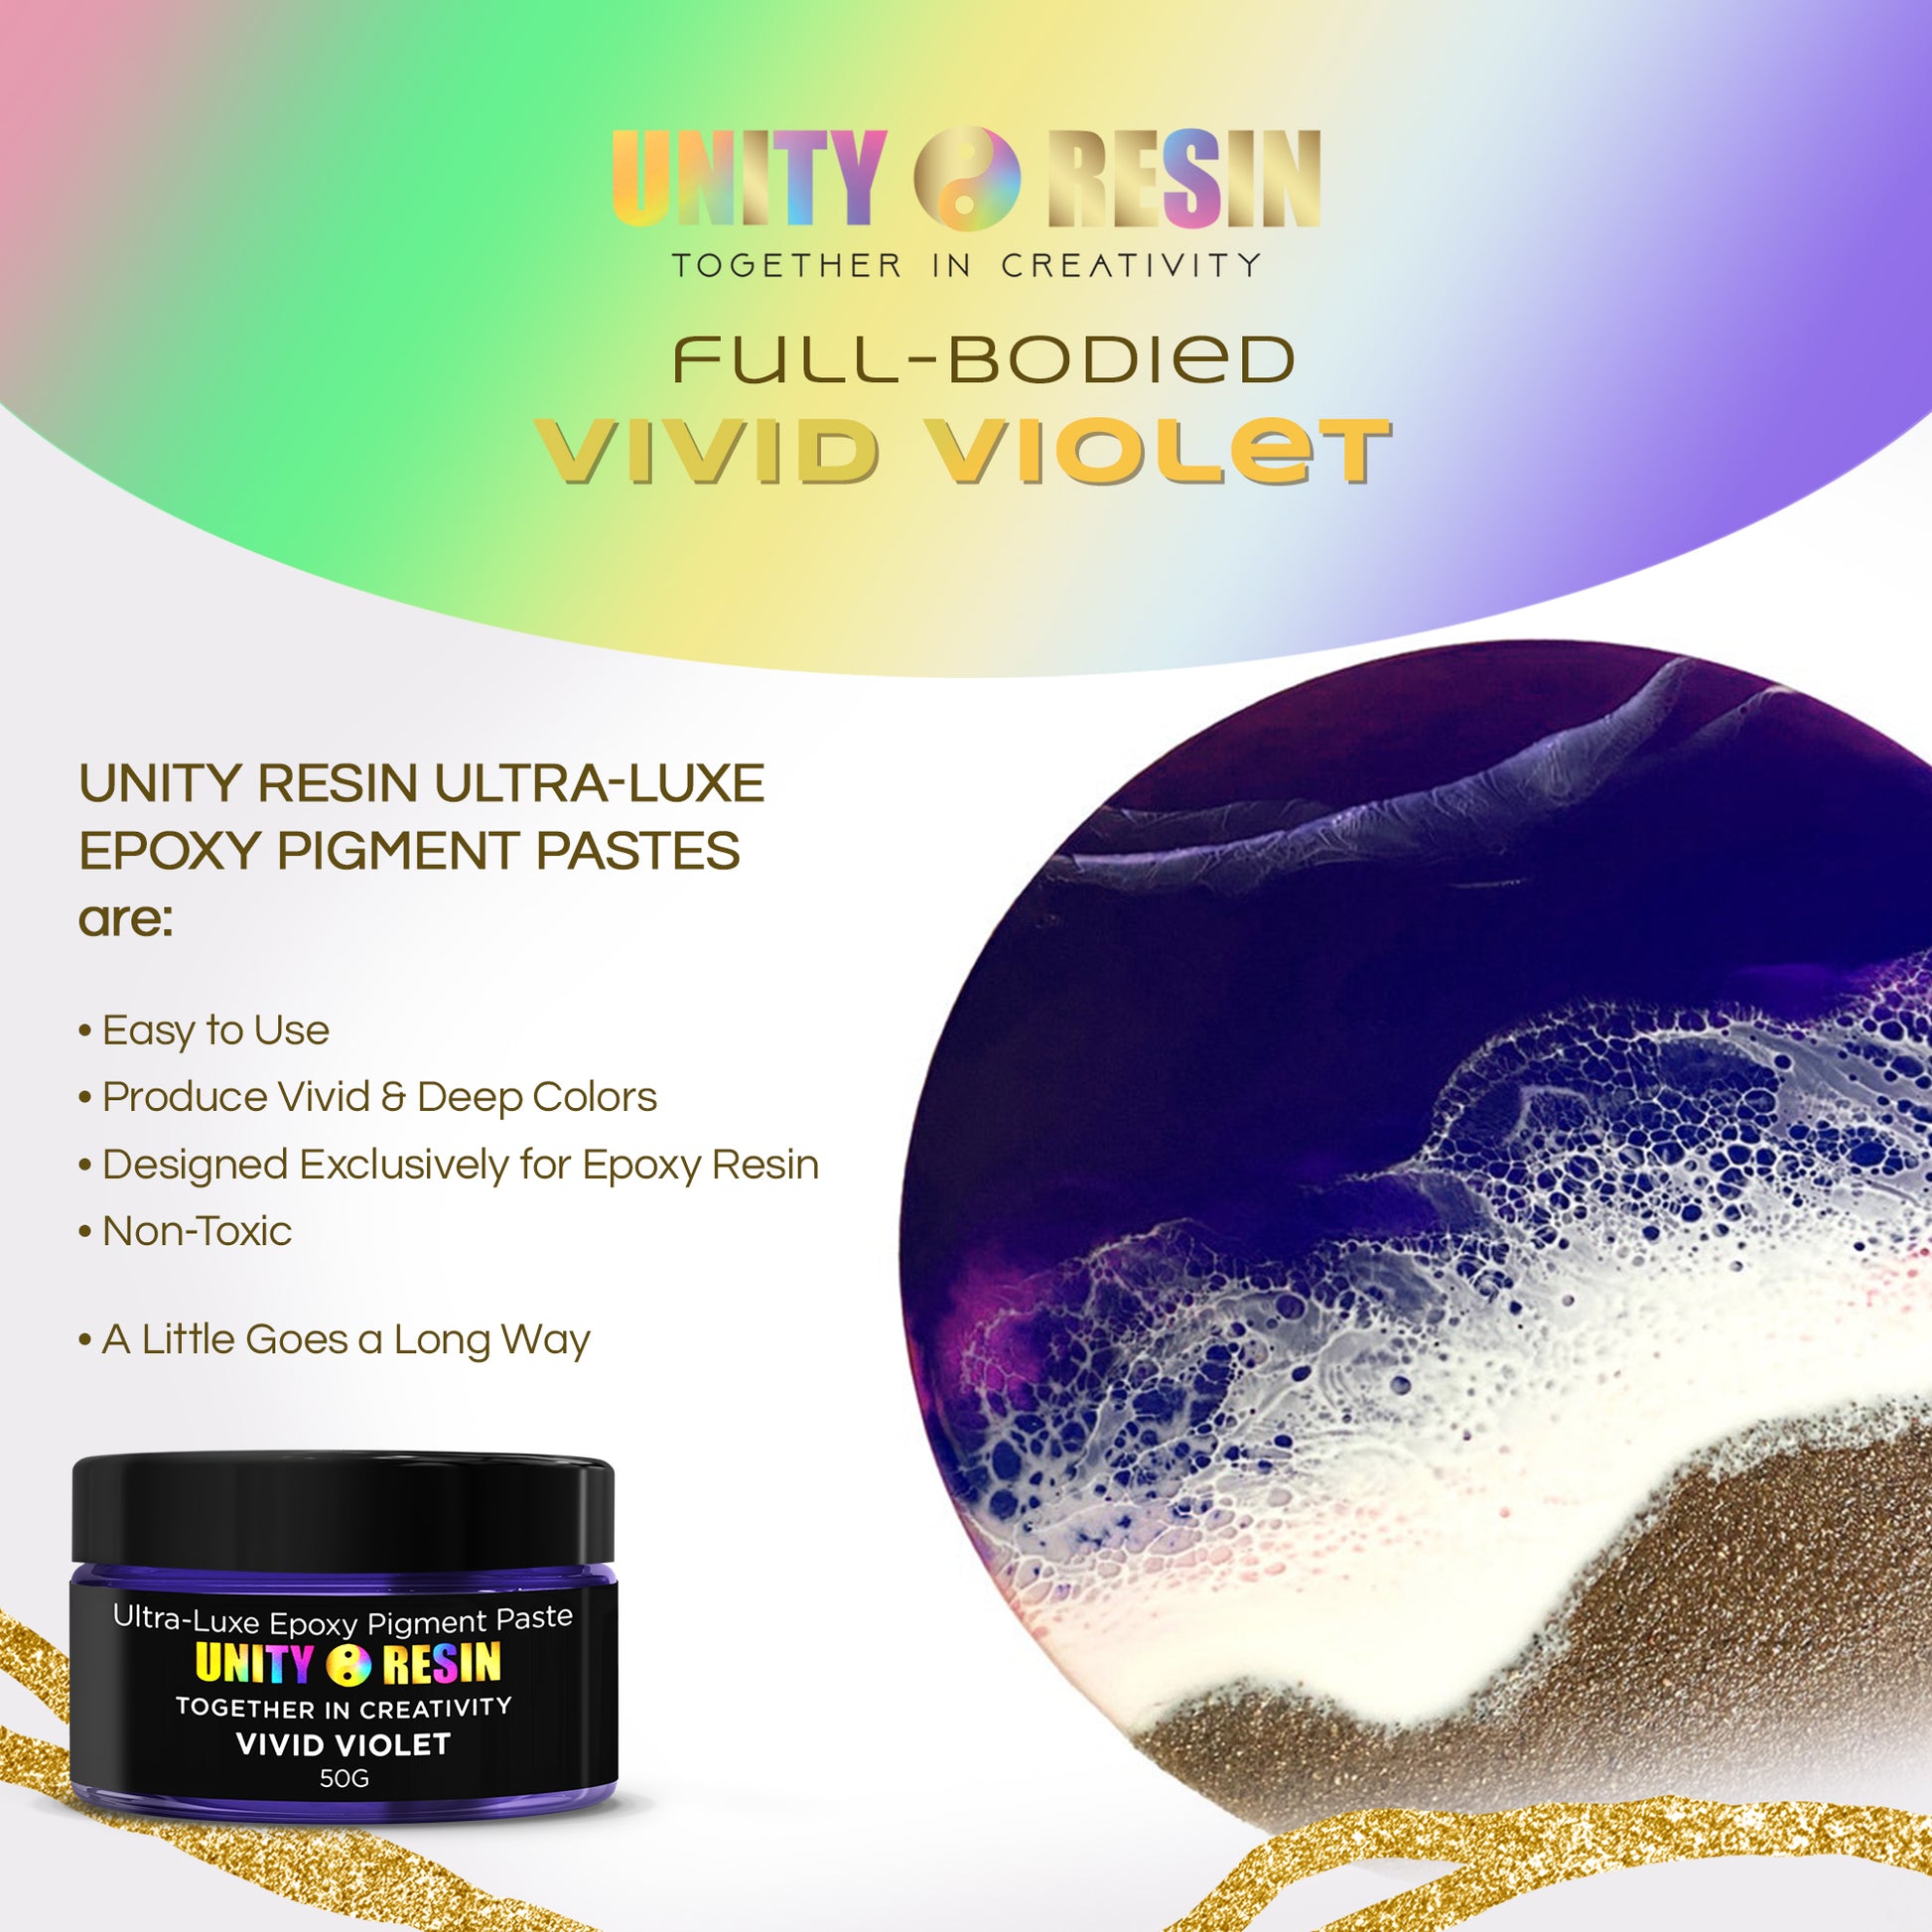 Ultra Luxe' Epoxy Pigment Paste-warm CASHMERE, Resin Craft, Resin Art,  Pearl Mica, Resin Color, Resin Pigments, Geode Art, Ivory Mica 50G 